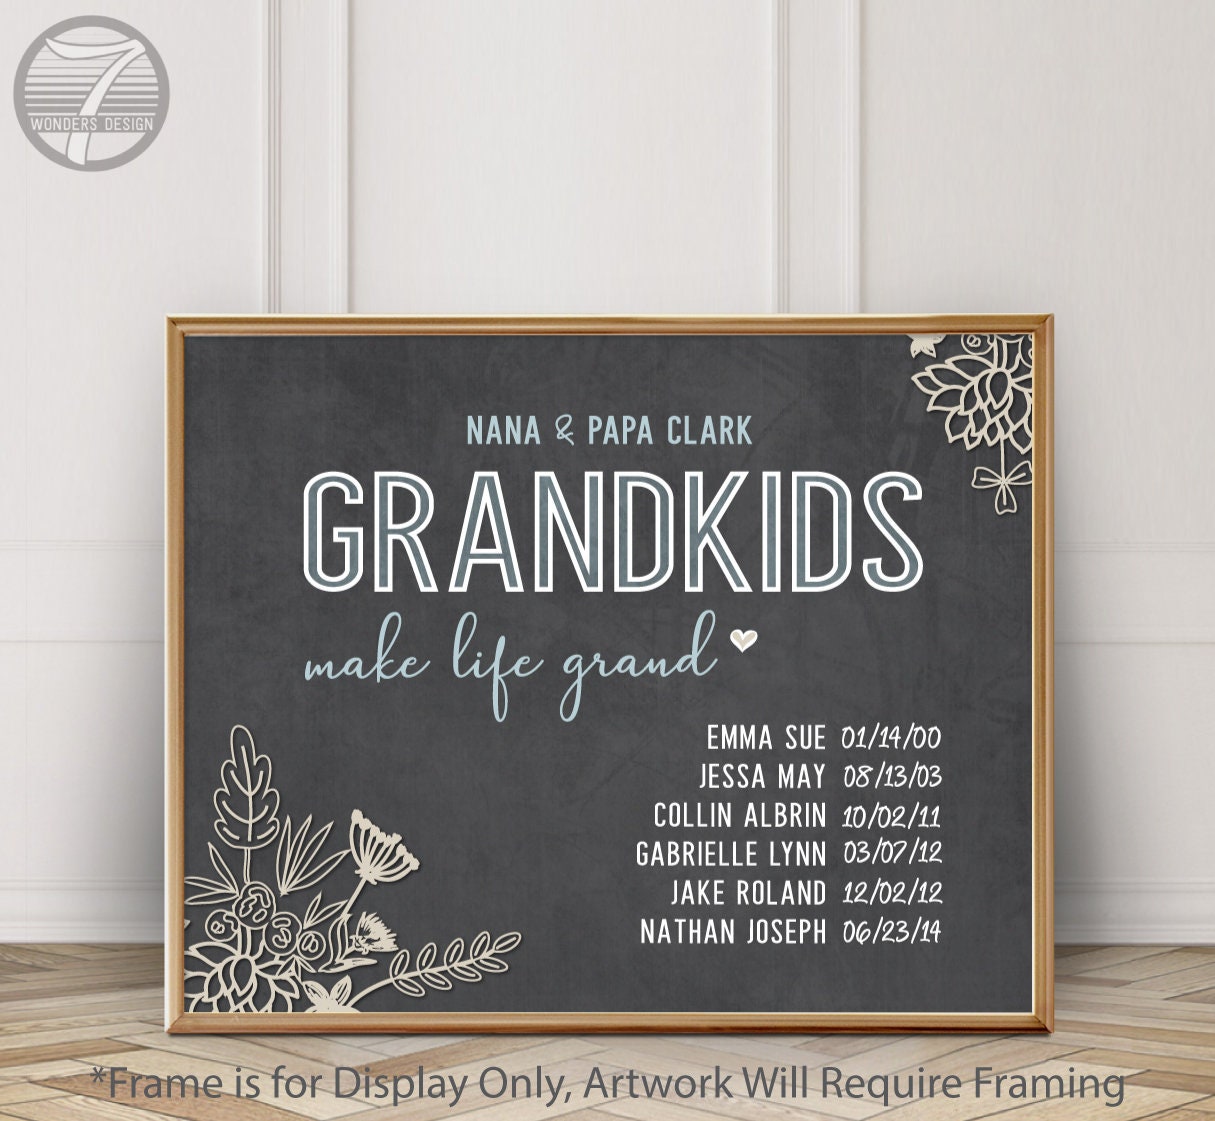 We Love You Grandma Photo Collage Canvas, Christmas Gifts For Grandma From  Grandkids, Personalized Grandma Gifts - Best Personalized Gifts For Everyone